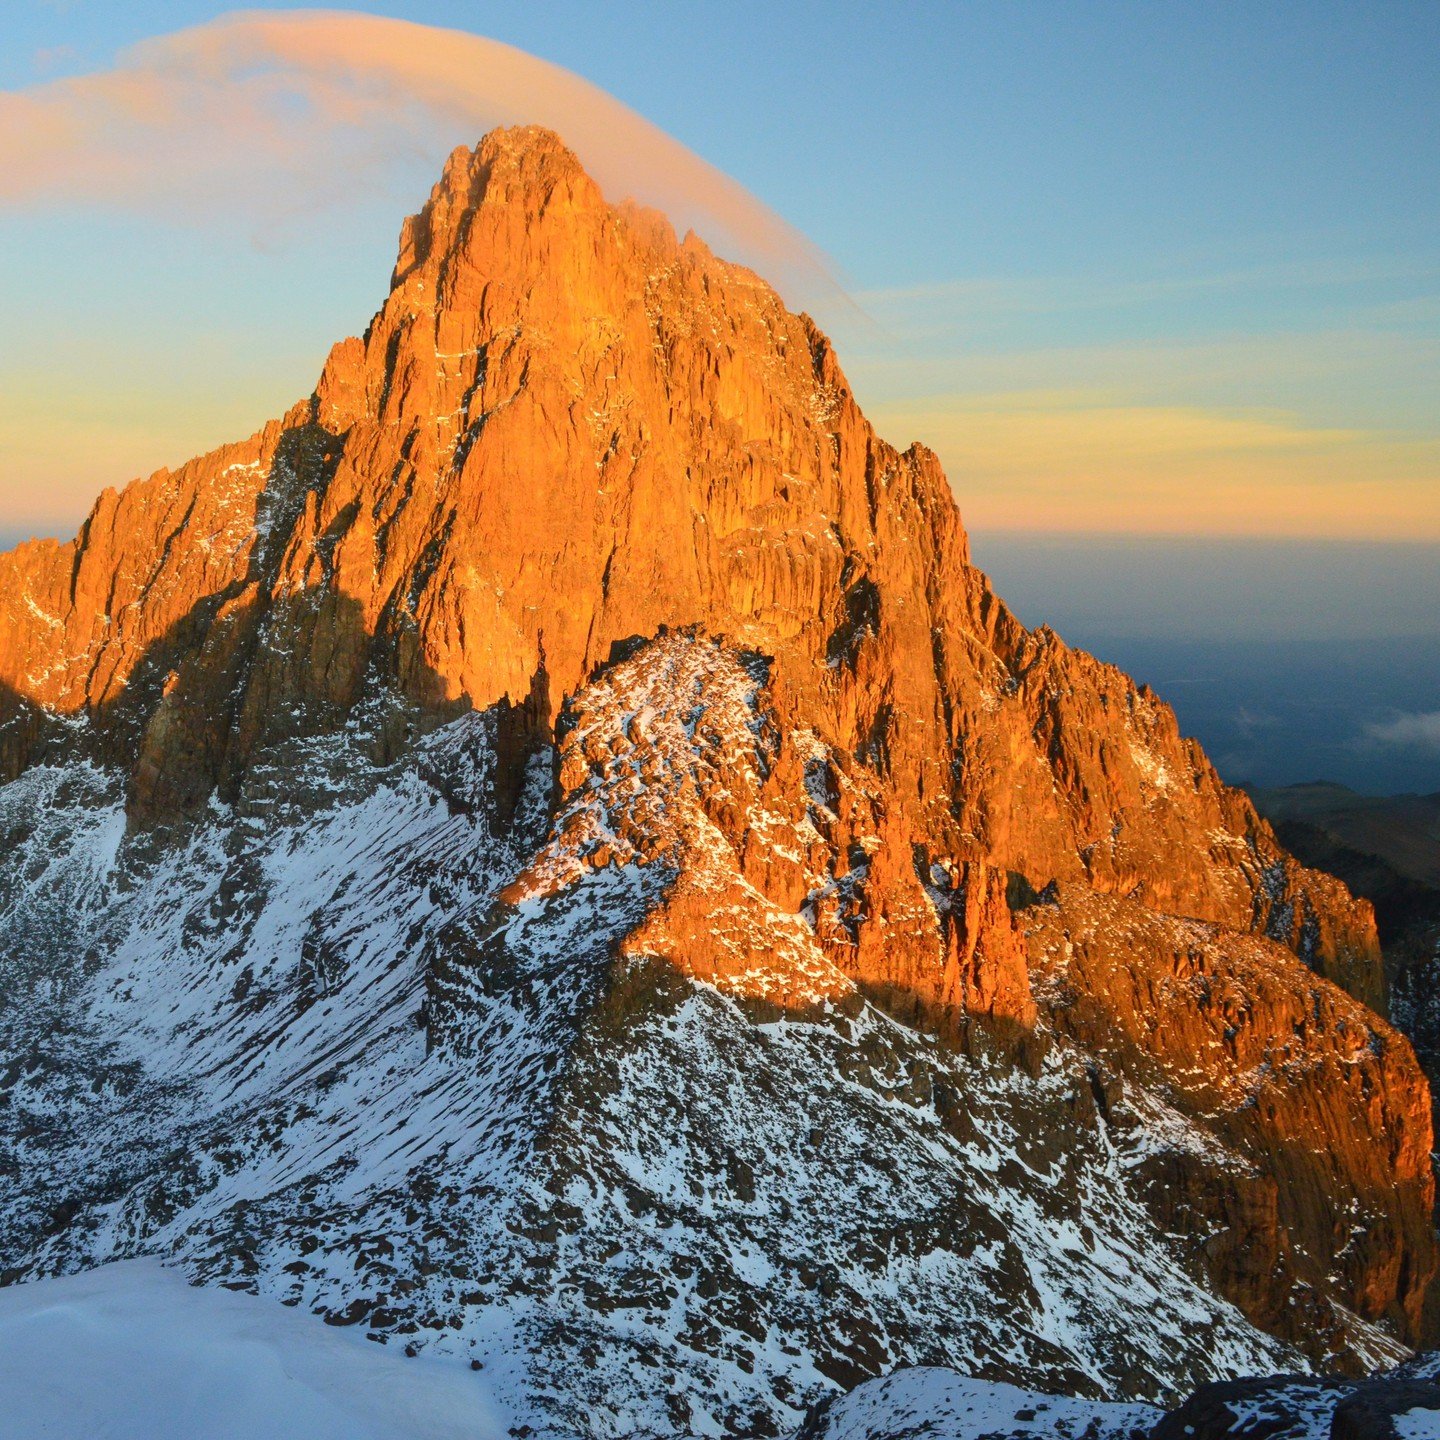 Snow capped Mount Kenya, is one of the most impressive landscapes in Africa. After Mount Kilimanjaro, Mount Kenya is the 2nd highest mountain on the continent, towering at 5,199 meters above sea level. An ancient extinct volcano, Mount Kenya is a wor